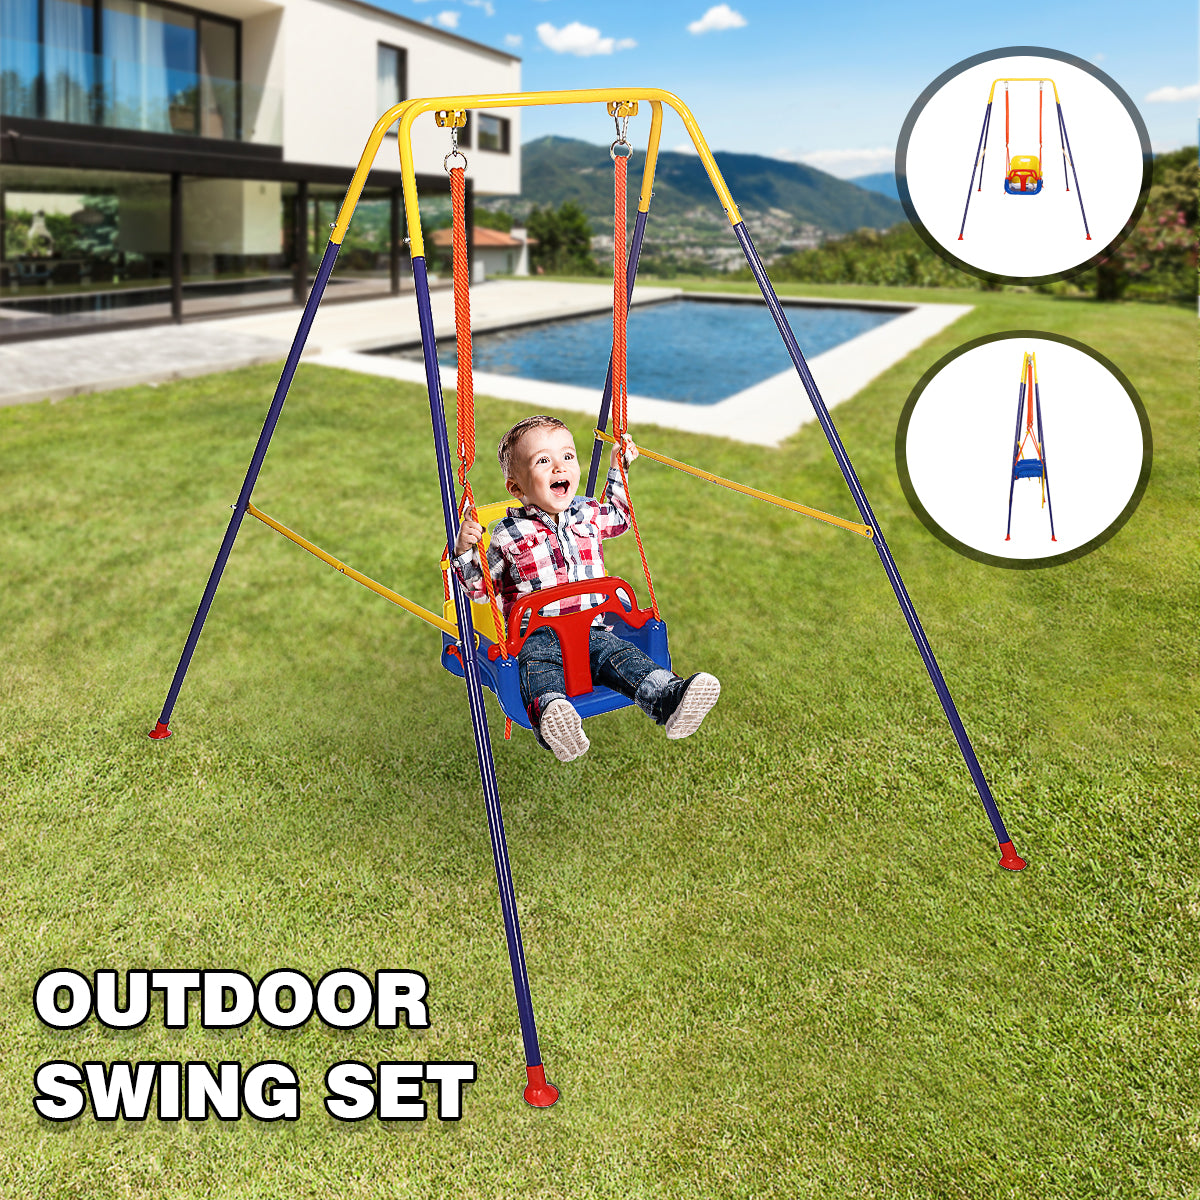 Kid Toddler Swing Seat with Stand Folding Frame 3-in-1 Kid Swing Set with Safety Seat Max 110Pounds for utdoor Indoor Backyard Play - Blue&Yellow